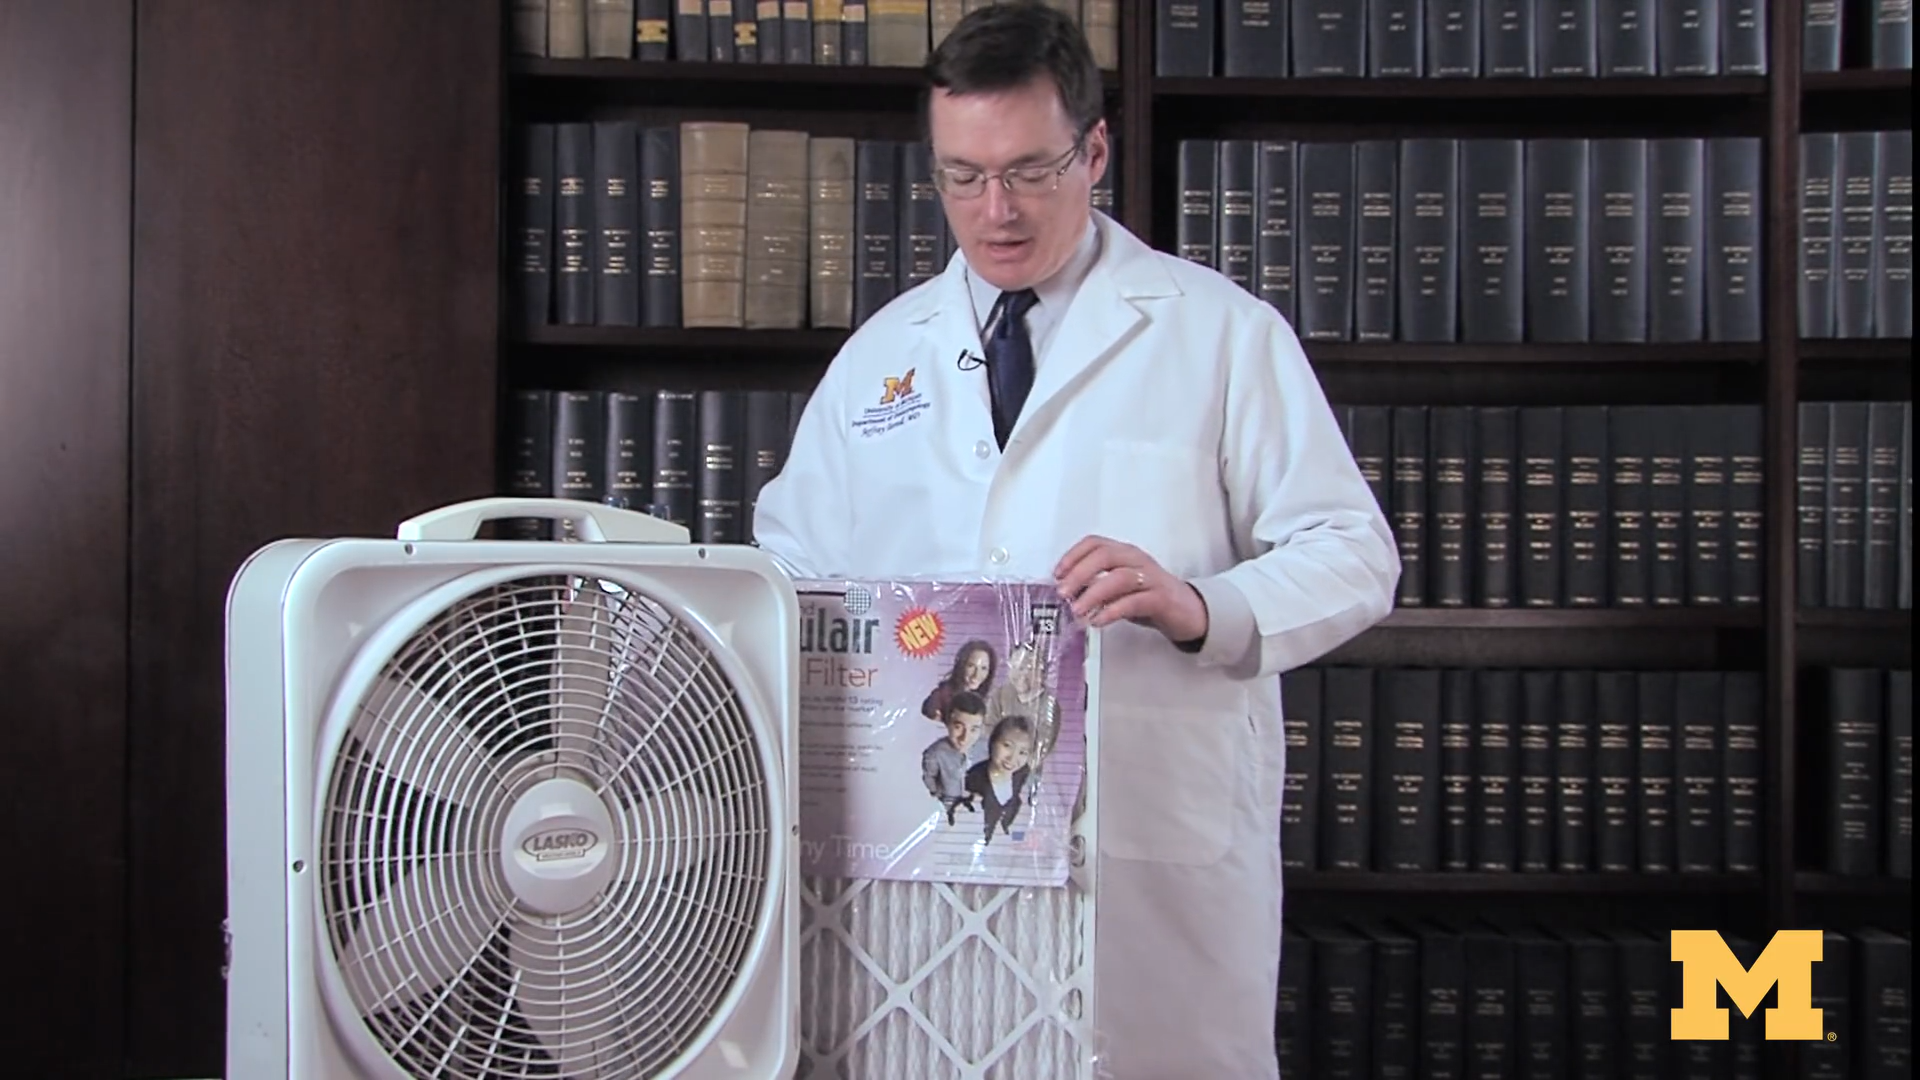 Dr. Jeffrey E. Terrell, director of the Michigan Sinus Center, demonstrates how to build an air purifier with a HEPA filter for about $25 with parts from your local hardware store.